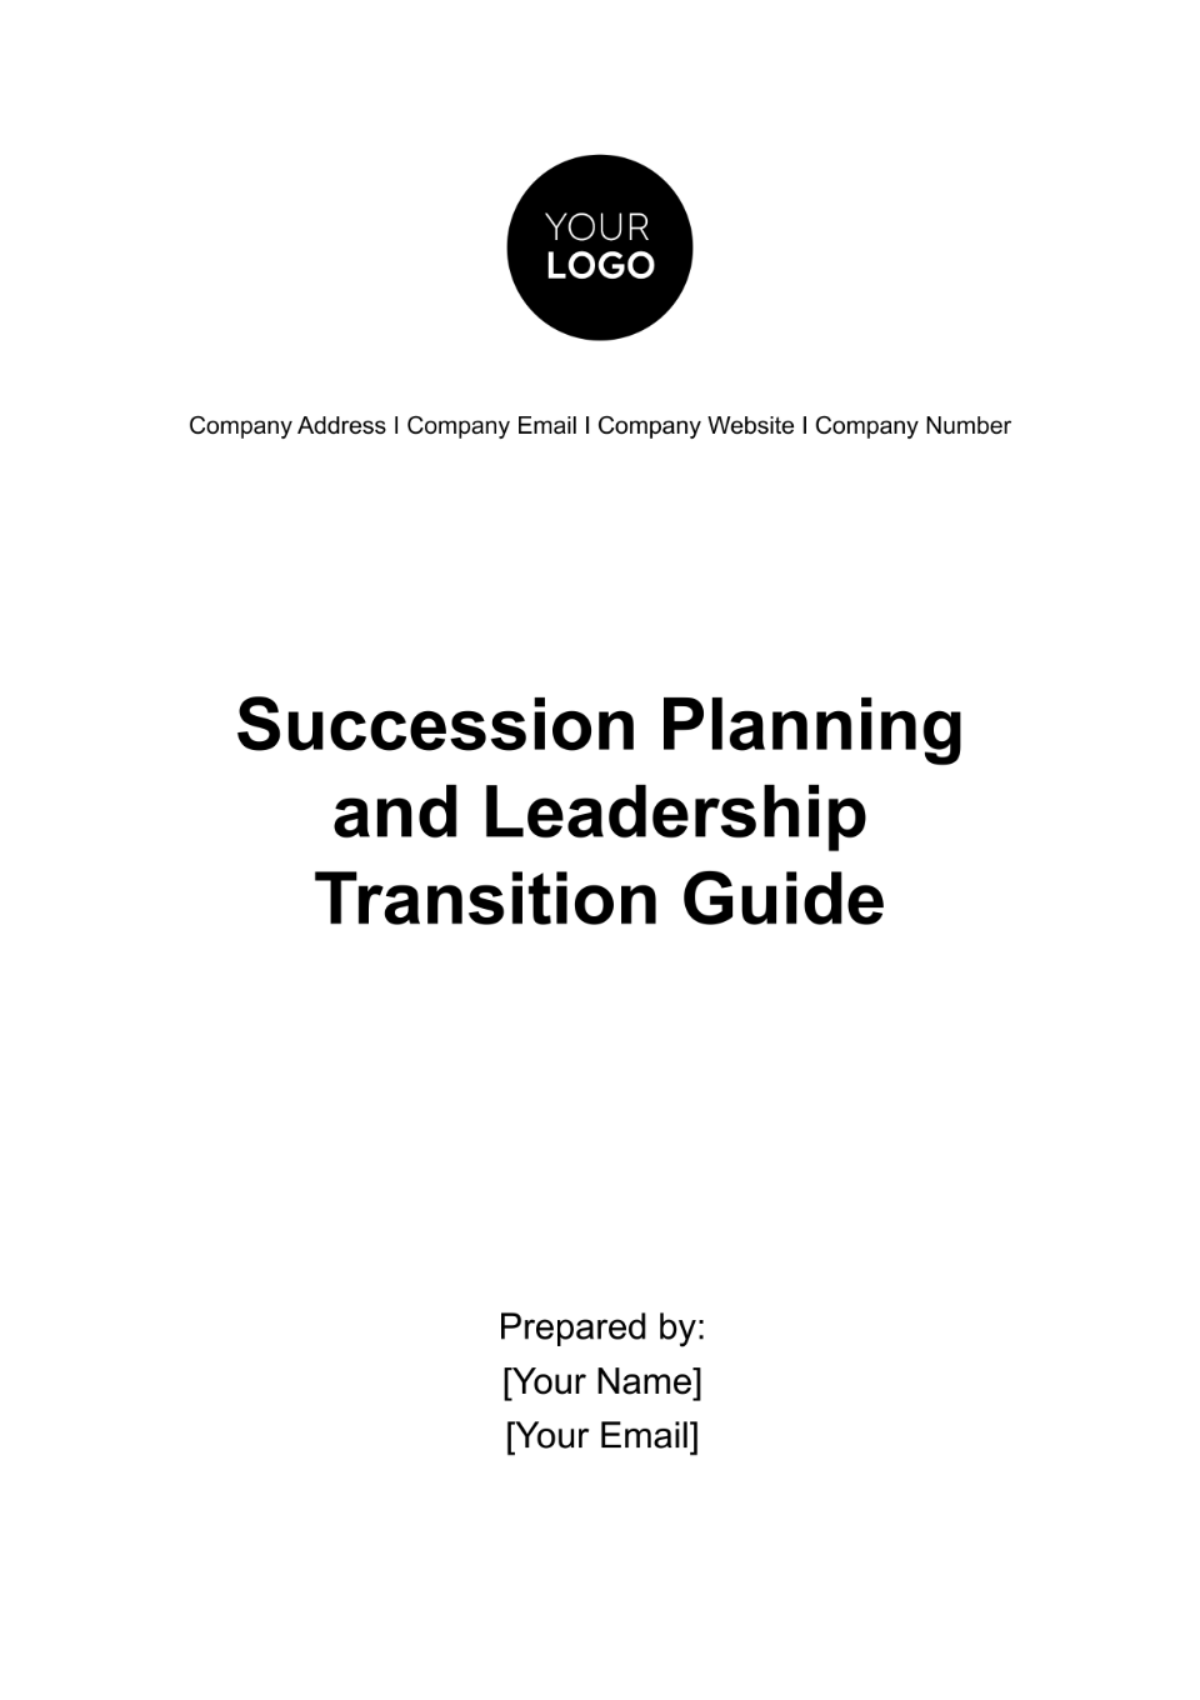 Succession Planning and Leadership Transition Guide HR Template